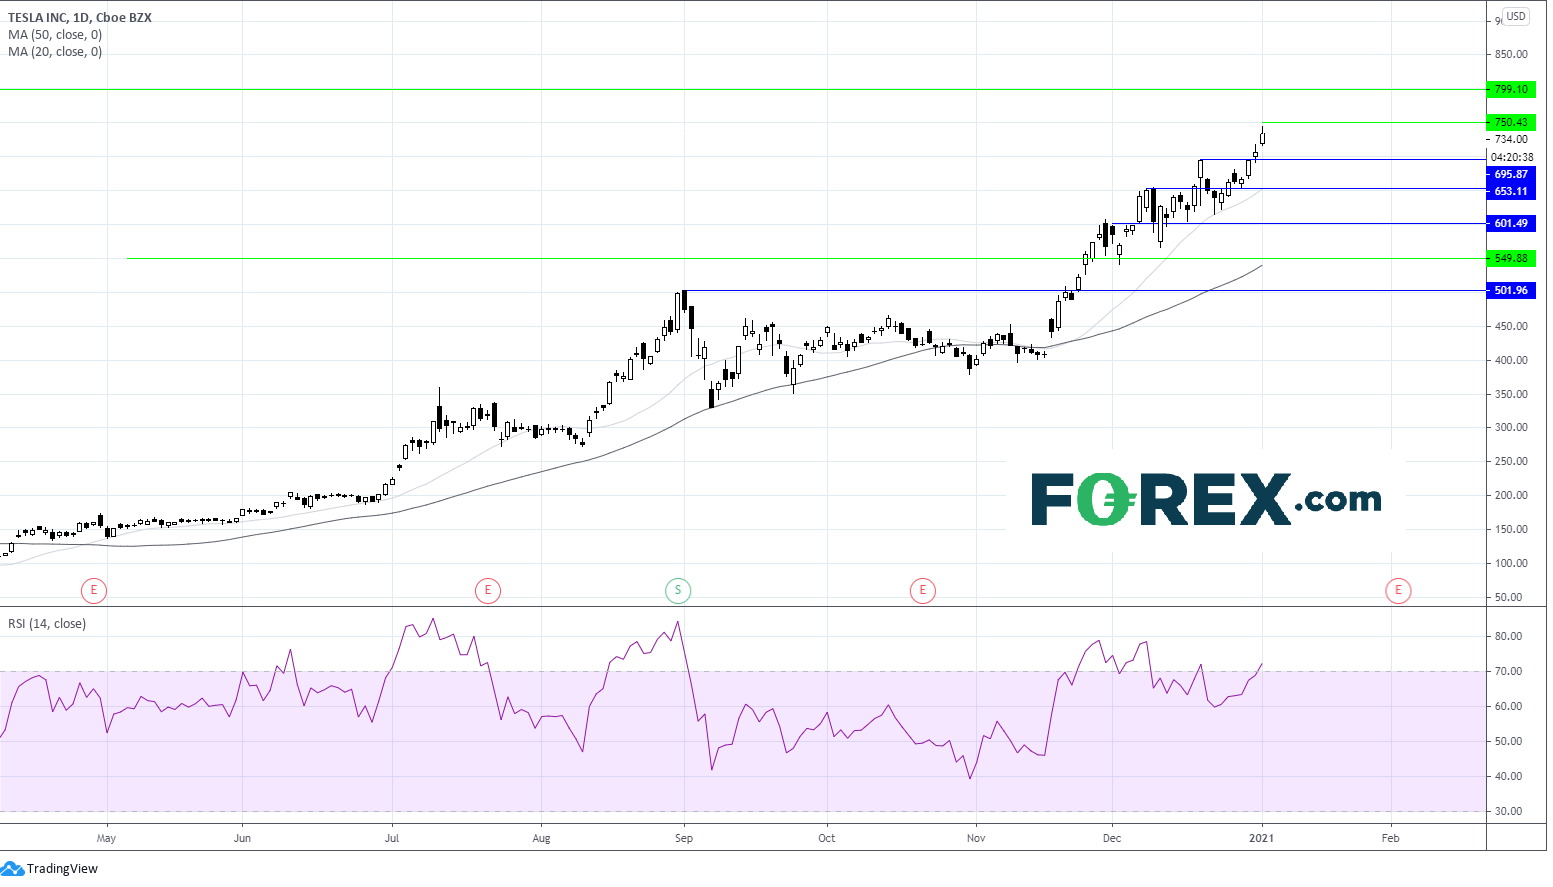 TradingView chart of Tesla.  Analysed on January 2021 by FOREX.com